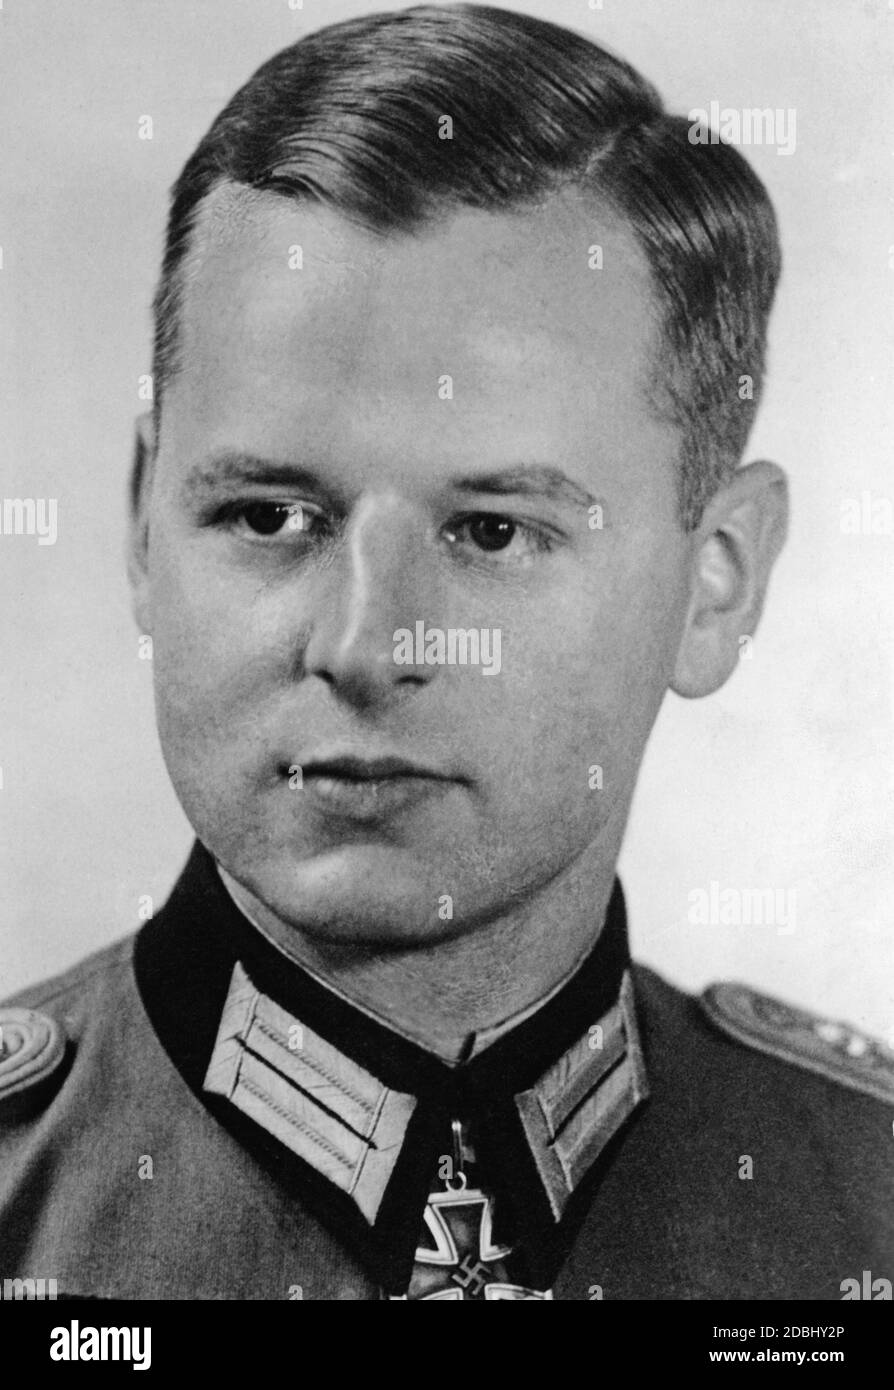 Captain Erich Dienenthal, 2.(Radfahrer)/Divisionsaufklaerungsabteilung 45 (2nd (Cyclist)/Division Reconnaissance Department 45), with the Knight's Cross in 1941. The date is the bestowal date. Stock Photo